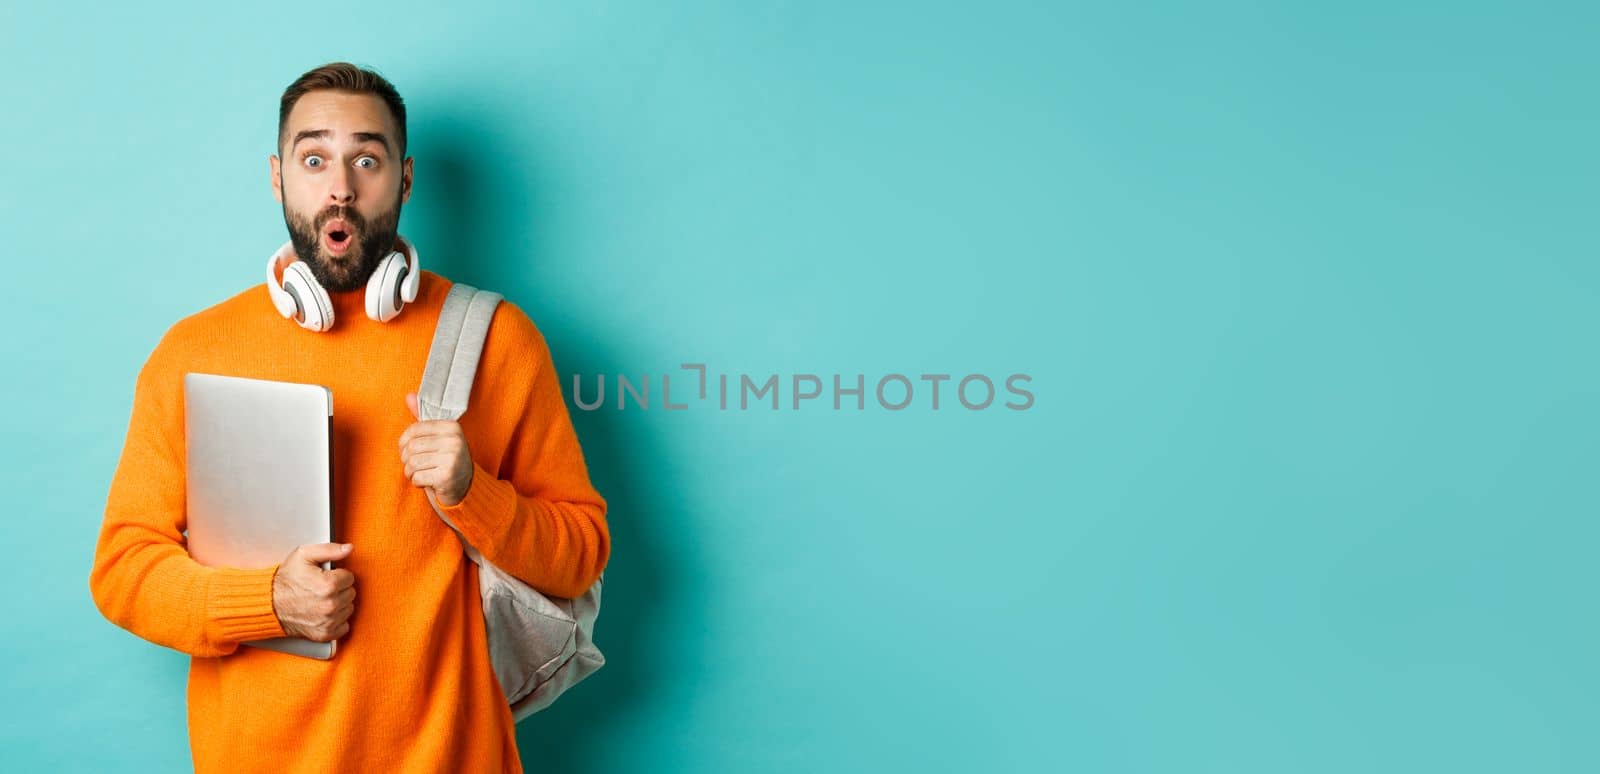 Happy man with backpack and headphones, holding laptop and smiling, looking surprised, standing over turquoise background.